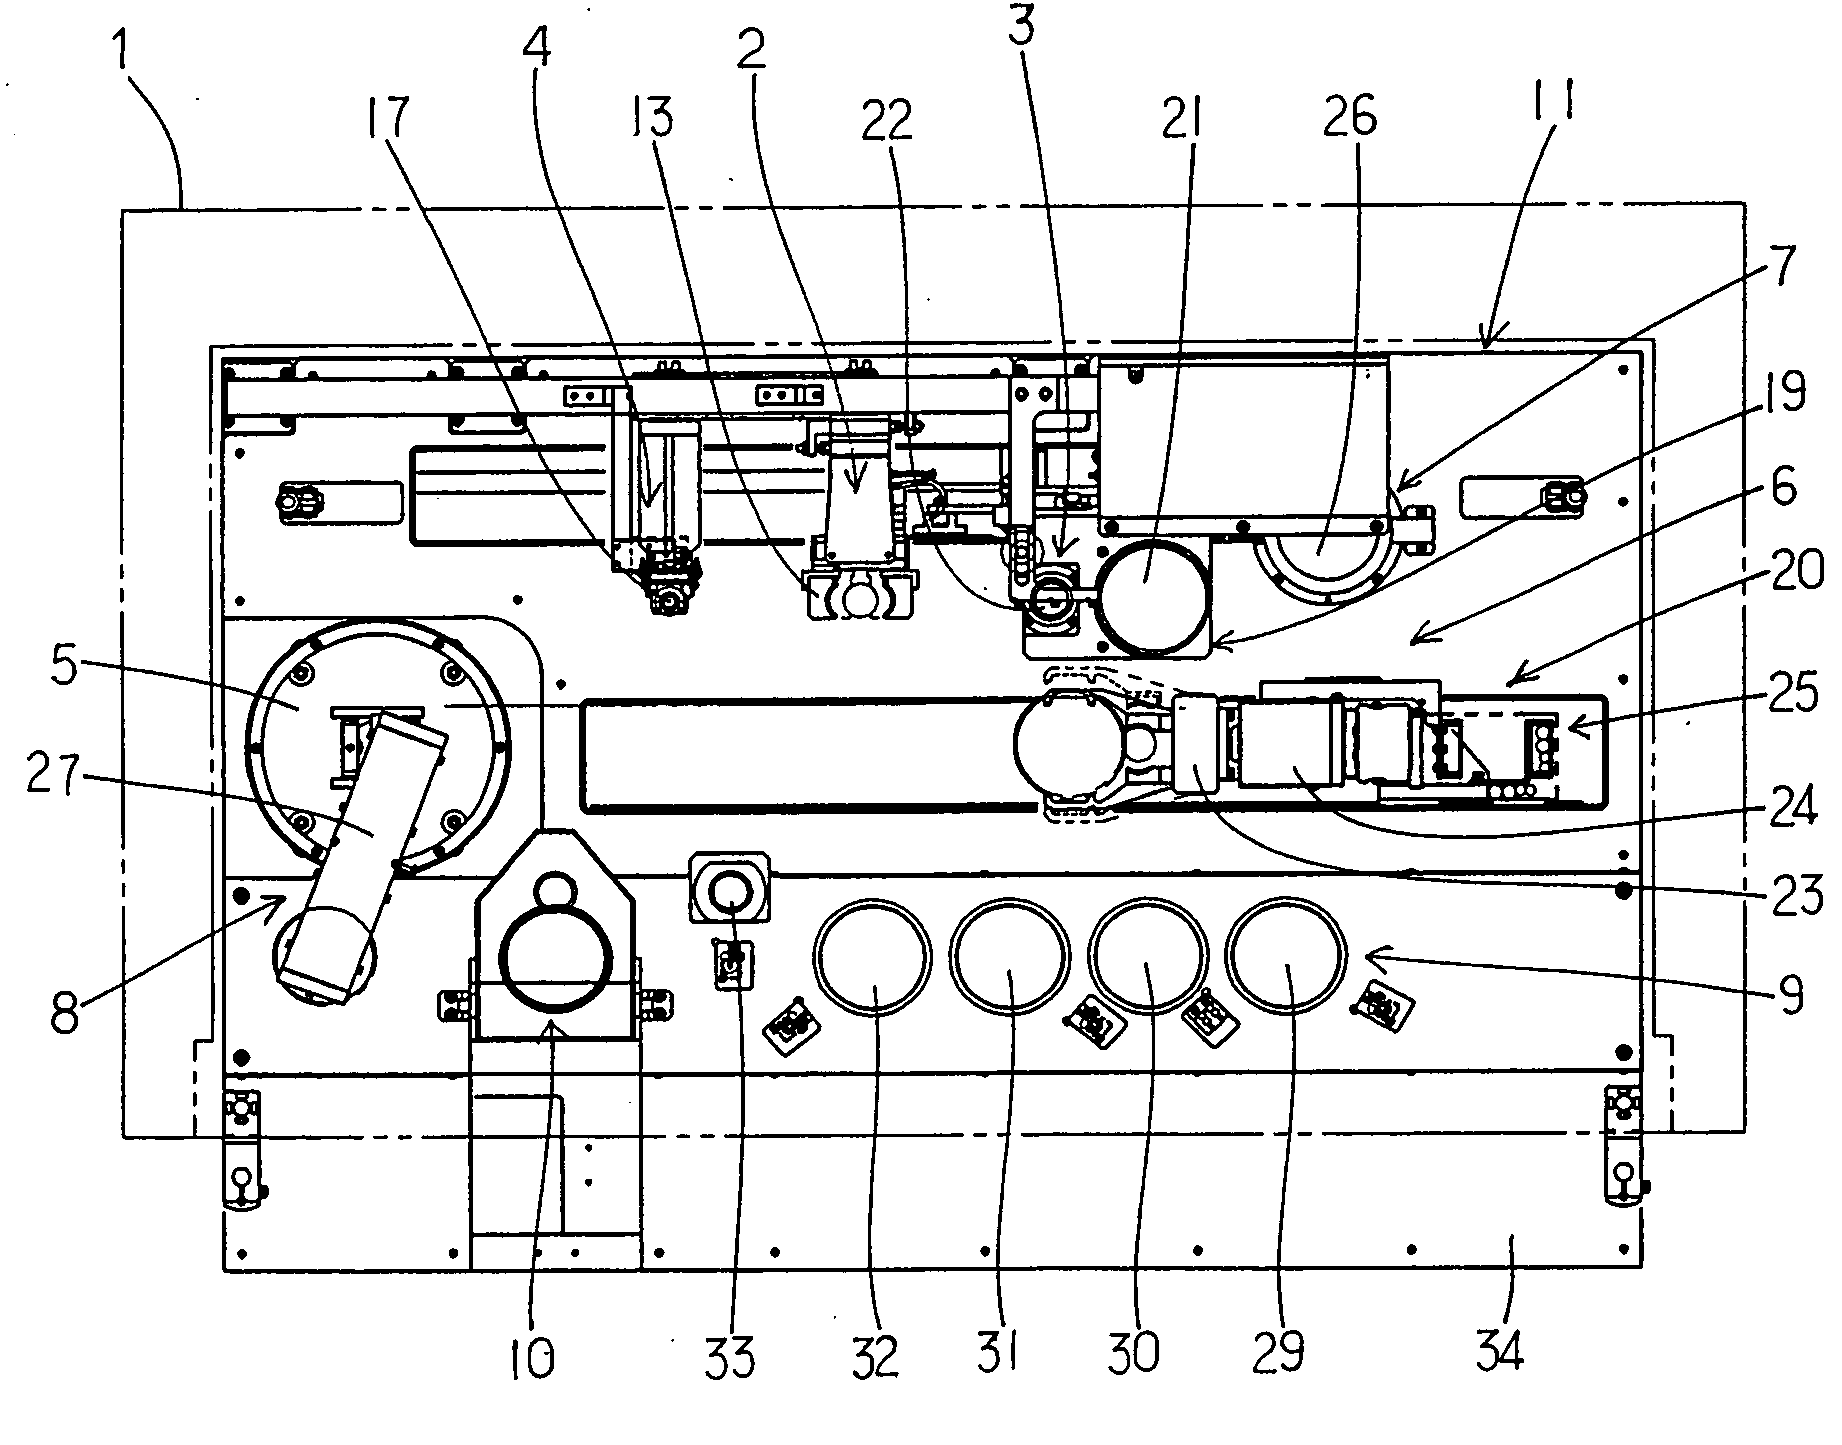 Apparatus for cell culture